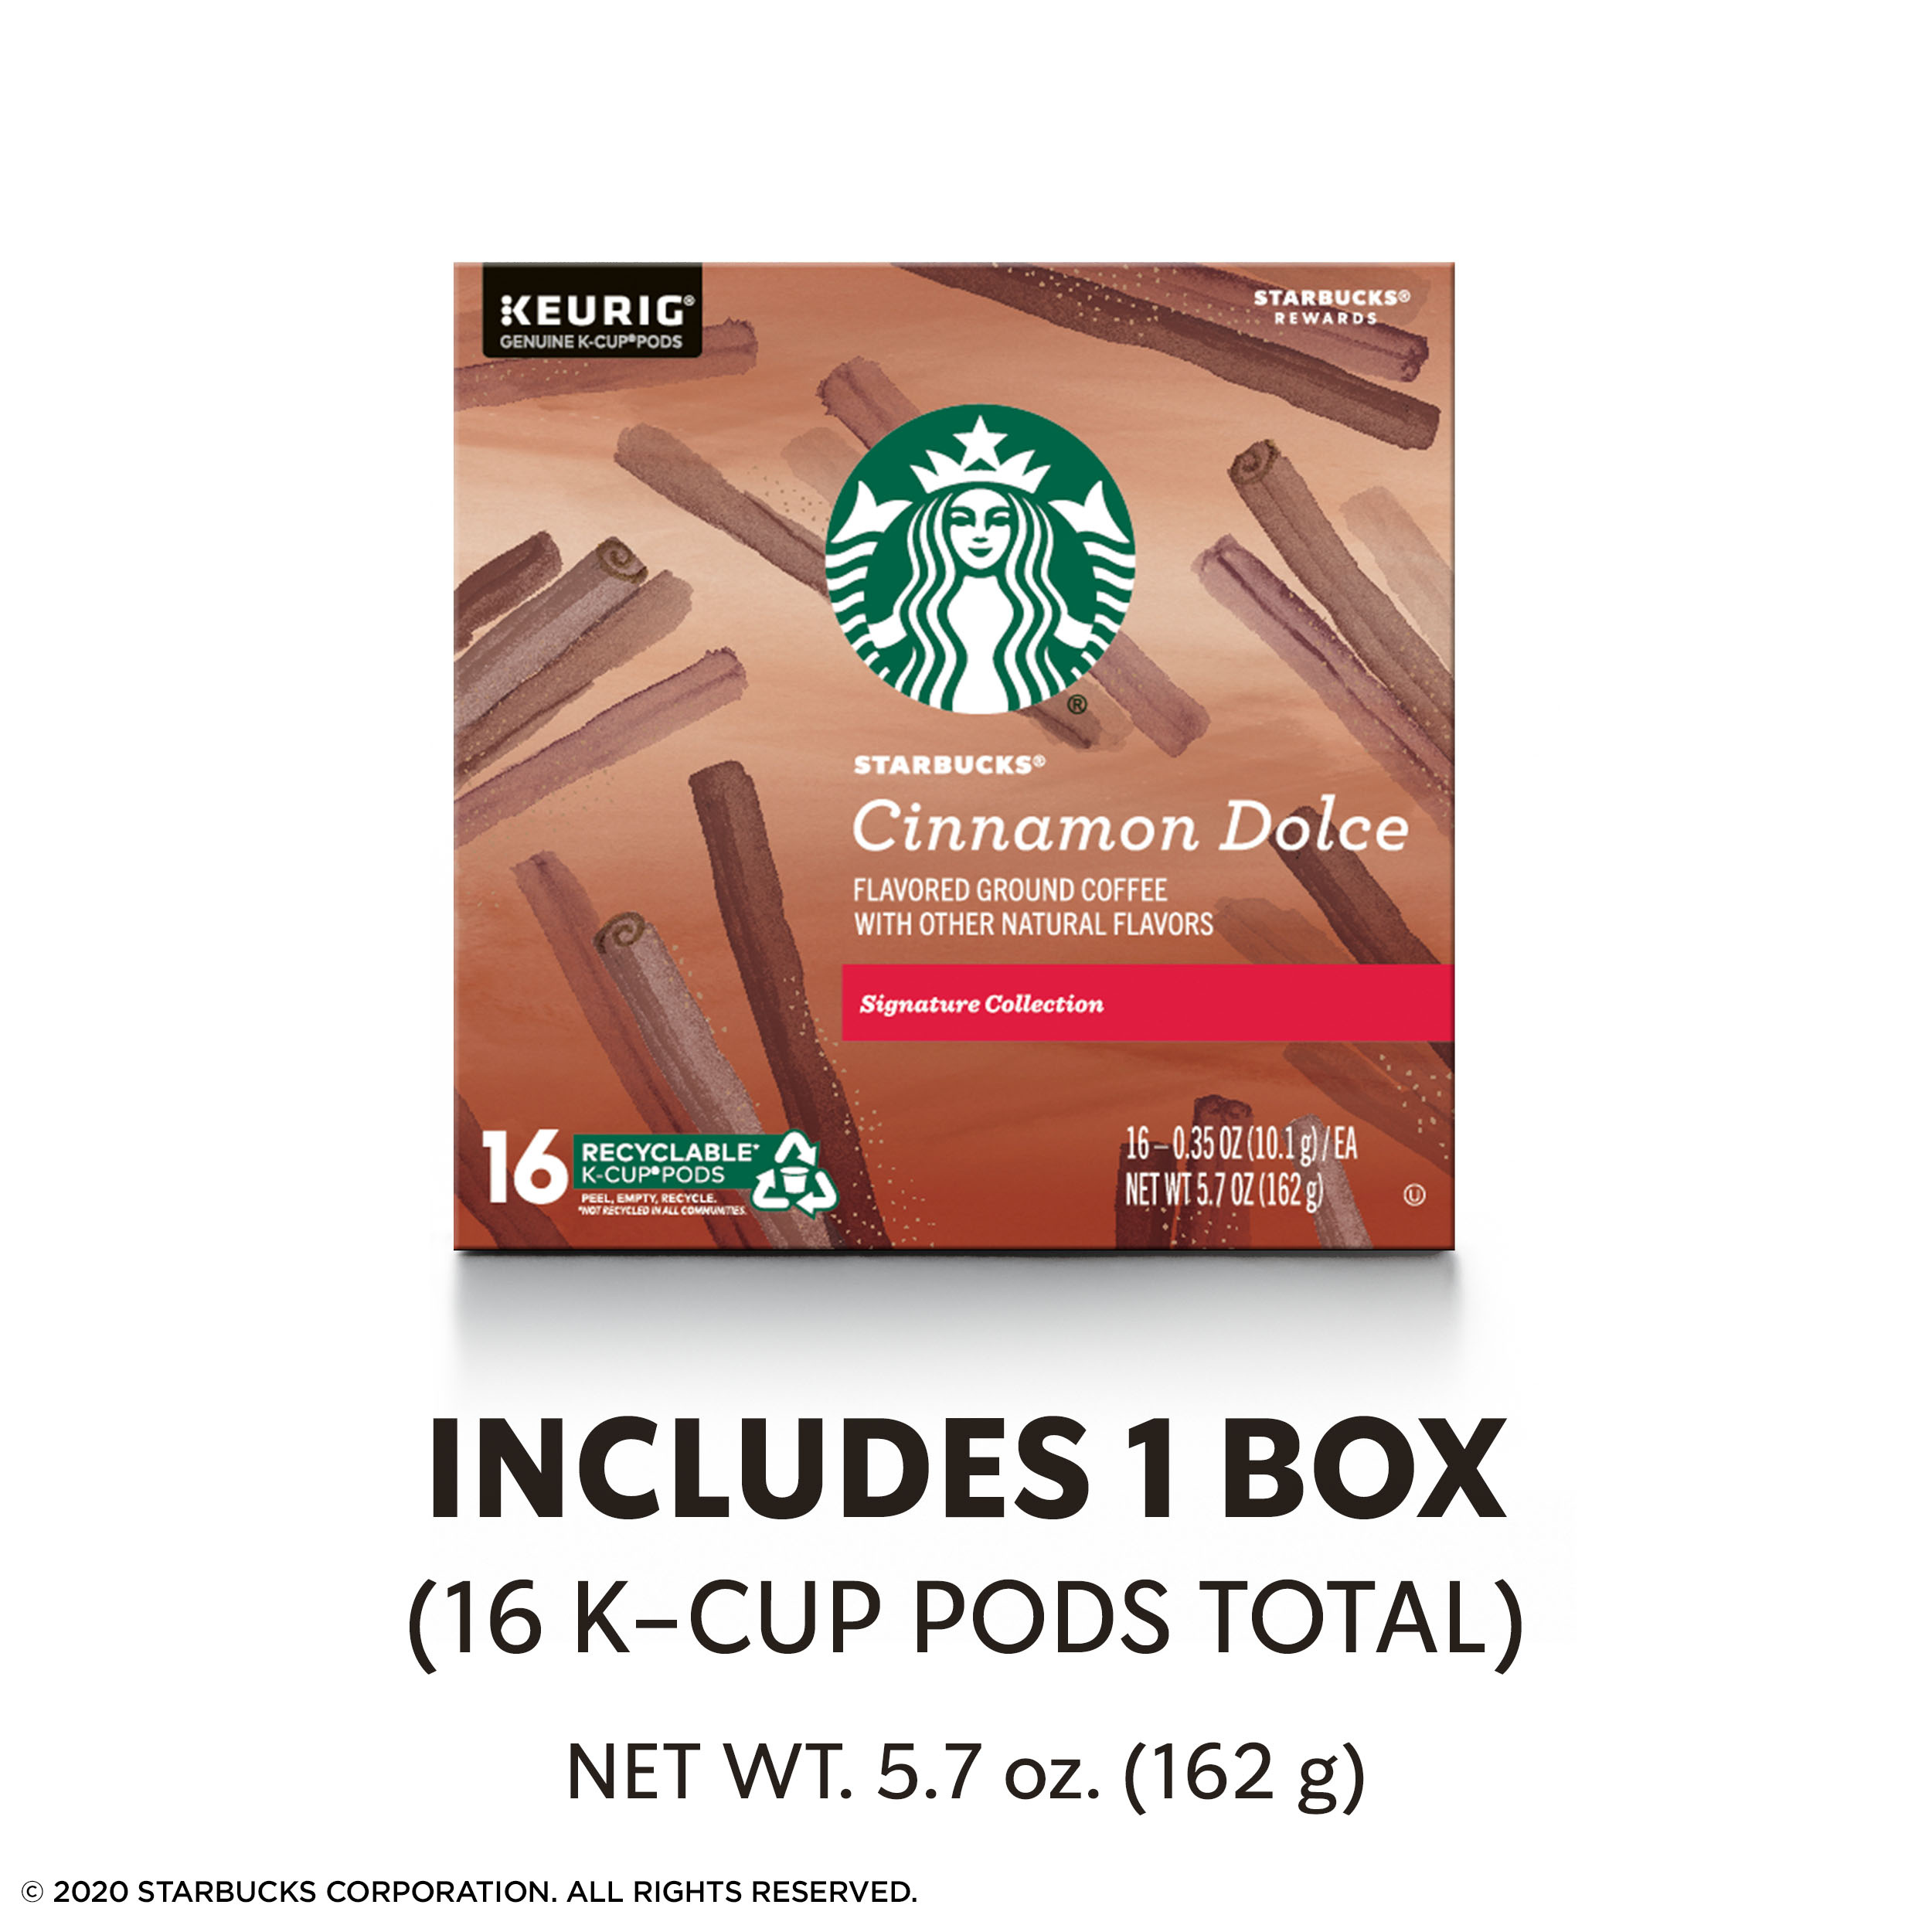 Starbucks Blonde Roast K-Cup Coffee Pods — Cinnamon Dolce for Keurig Brewers — 1 box (16 pods) - image 4 of 6